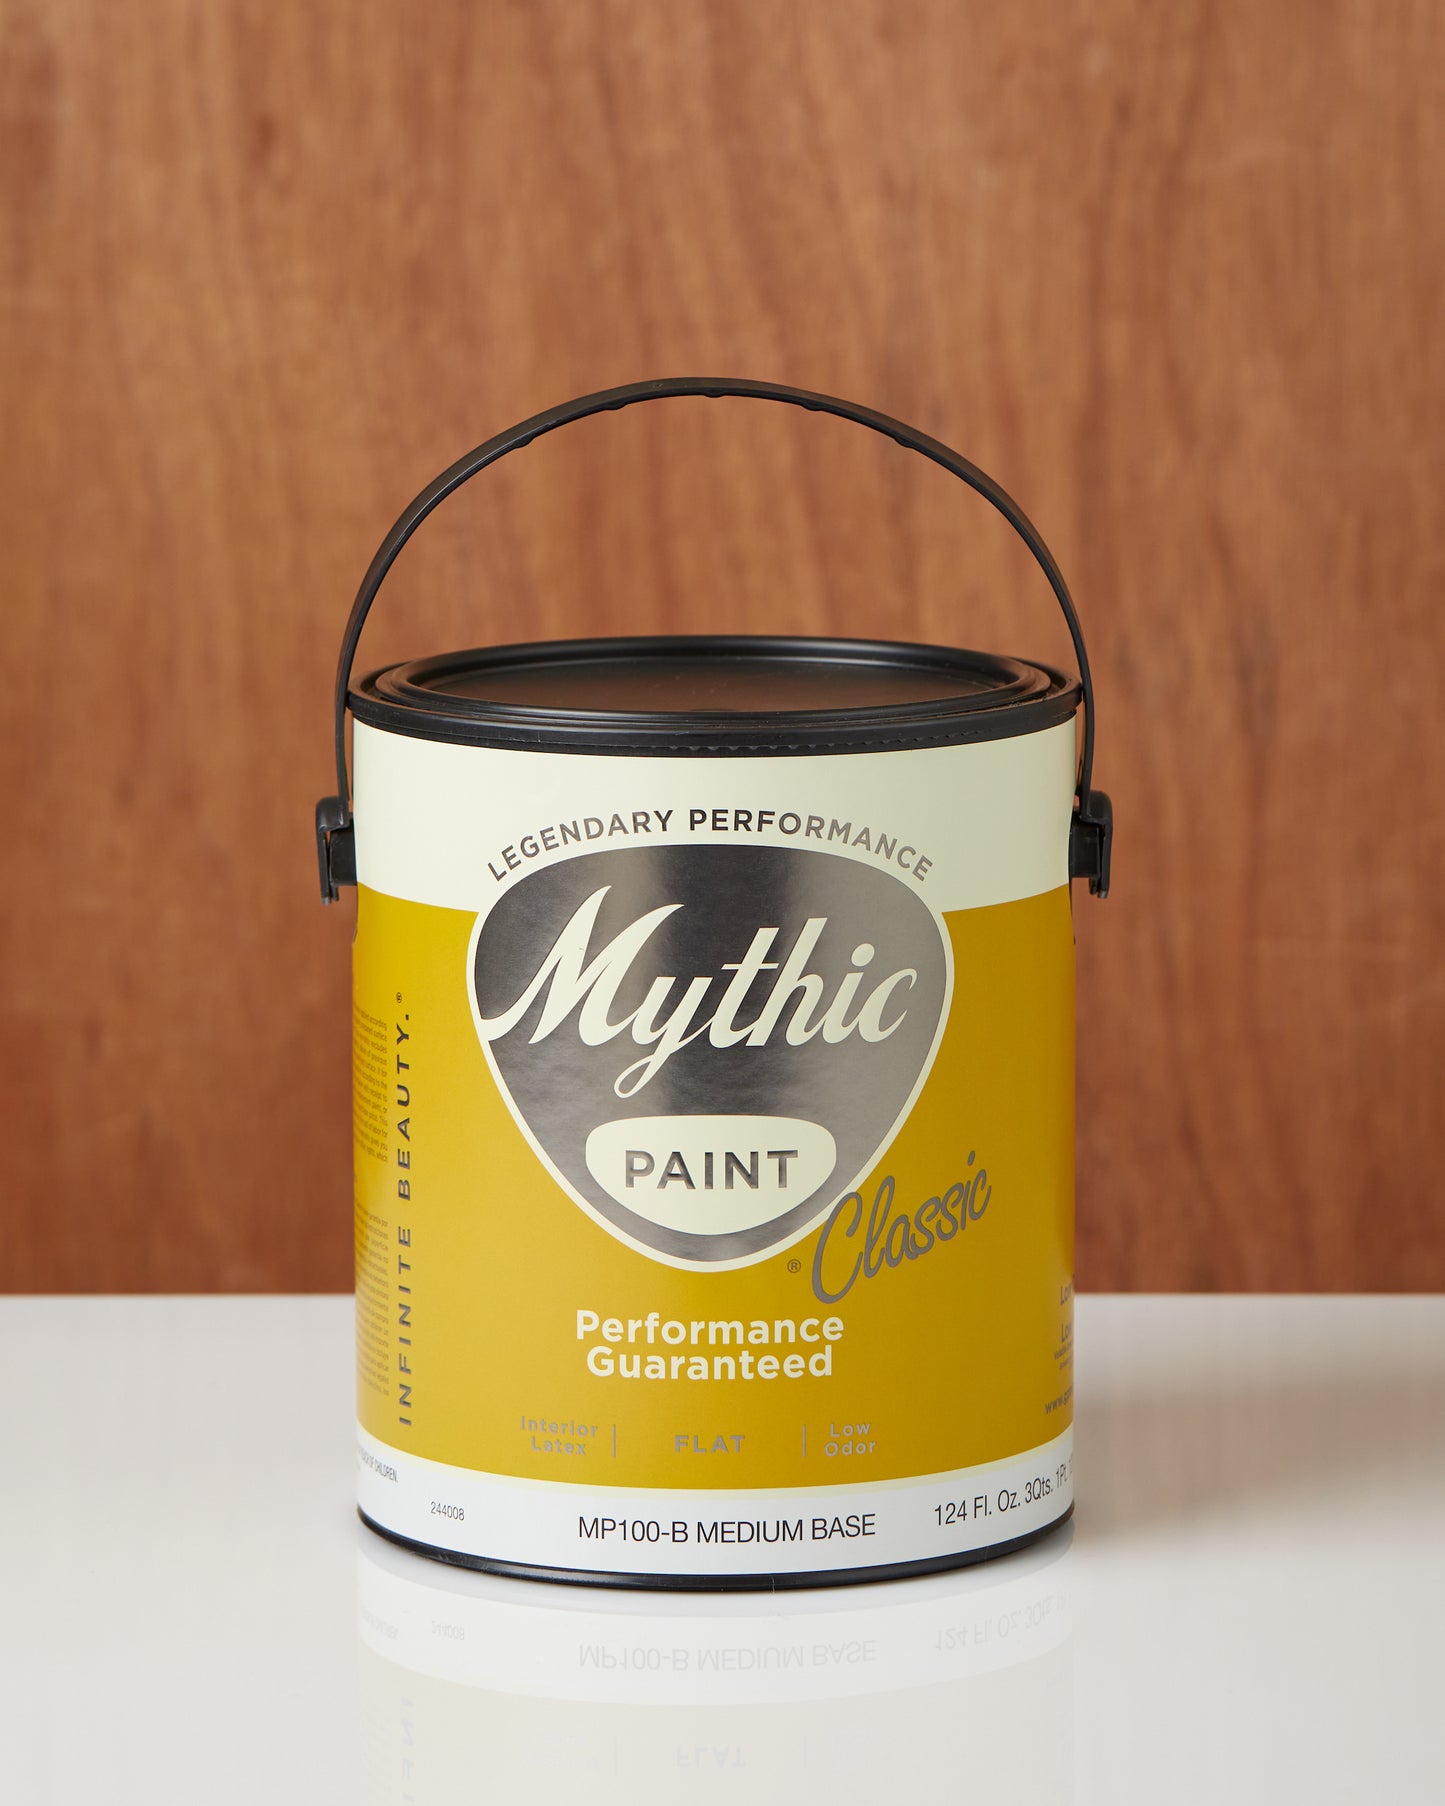 Mythic Paint - Classic Interior Latex Low Odor Paint